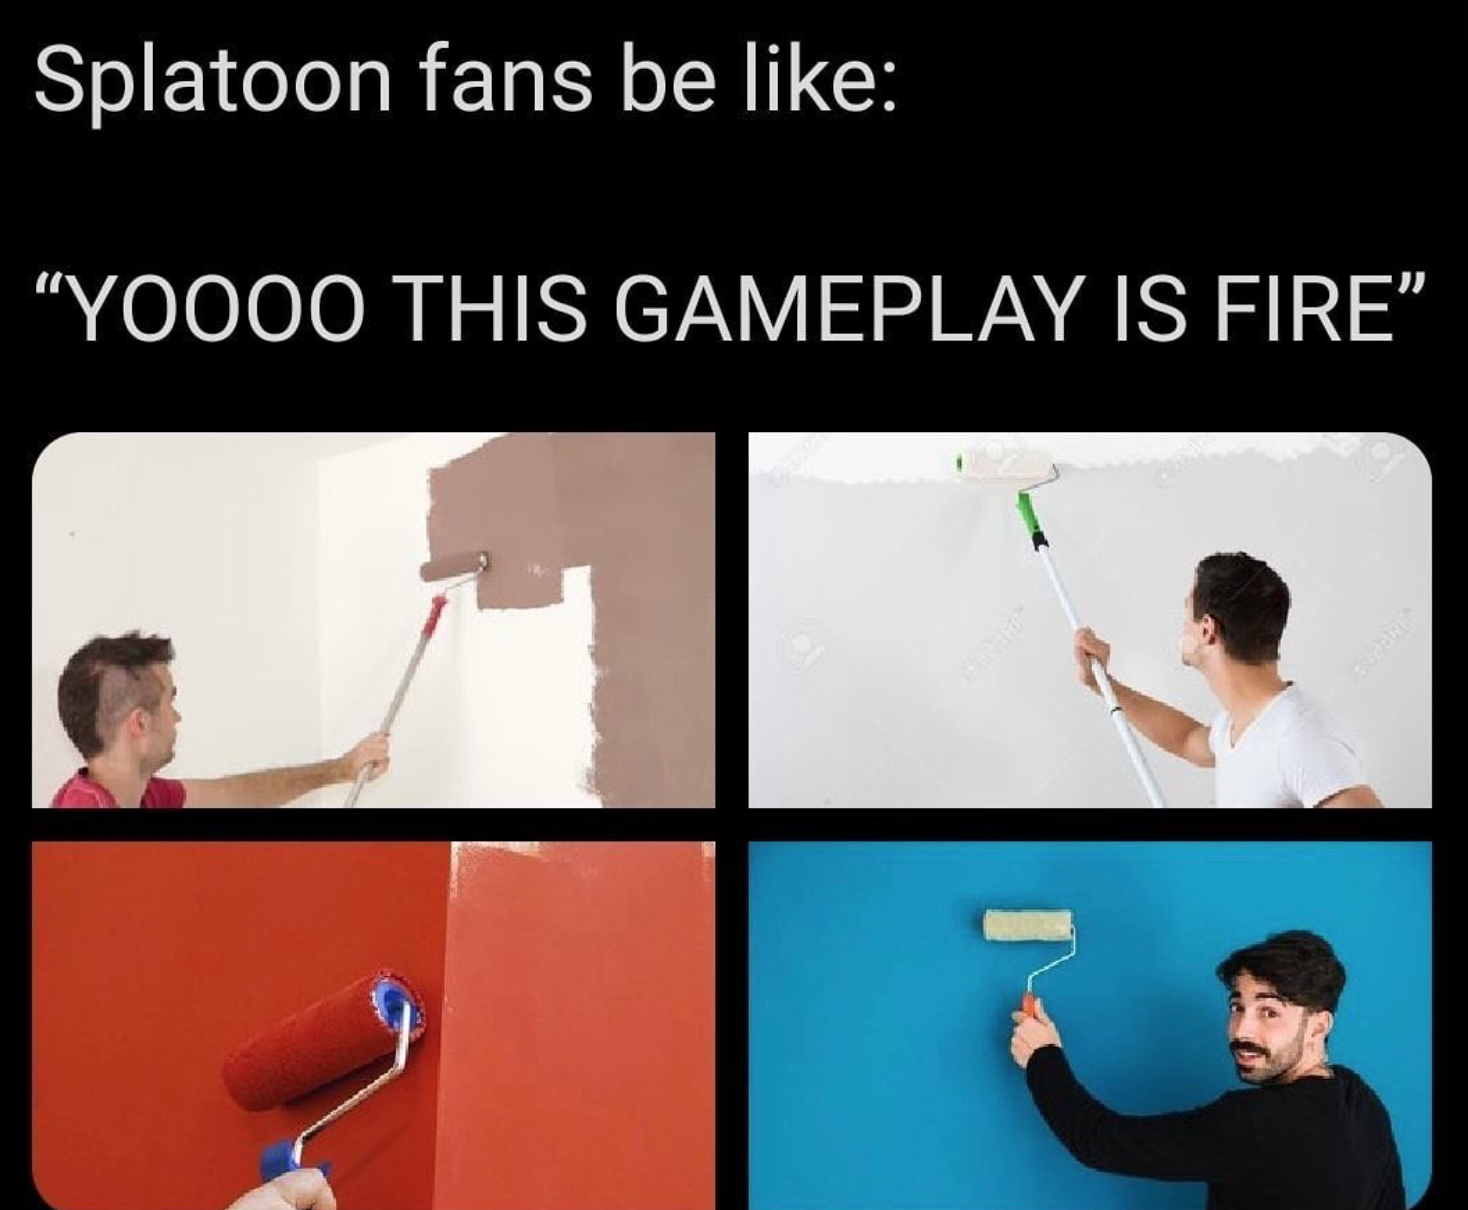 funny gaming memes - presentation - Splatoon fans be "Yoooo This Gameplay Is Fire"